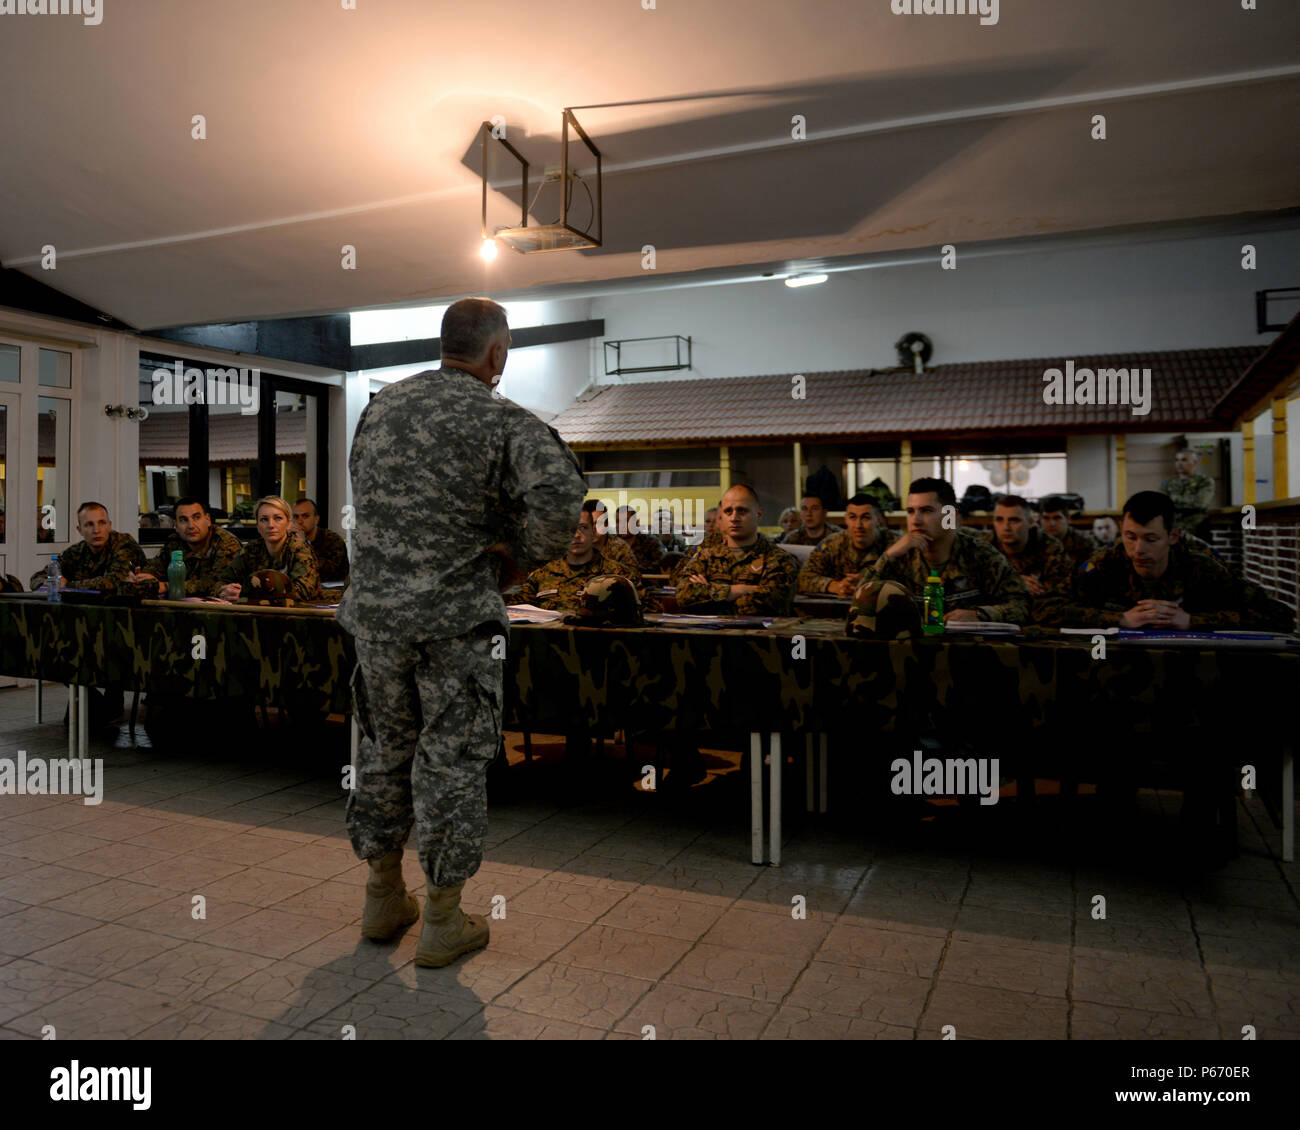 U.S. Army Command Sgt. Maj. Harley Schwind, NATO Headquarters Sarajevo senior enlisted leader, teaches a class to 40 soldiers from the Bosnia and Herzegovina Armed Forces at the Rajlovac Barracks in Sarajevo, BiH, May 11, 2016. Sergeant Major Schwind was briefing as part of the AFBiH Primary Leadership Development Course, a five-week course designed to provide young soldiers with the knowledge and skills to be future NCOs. The sergeant major is a Mandan, N.D., native deployed from the North Dakota Army National Guard. Stock Photo